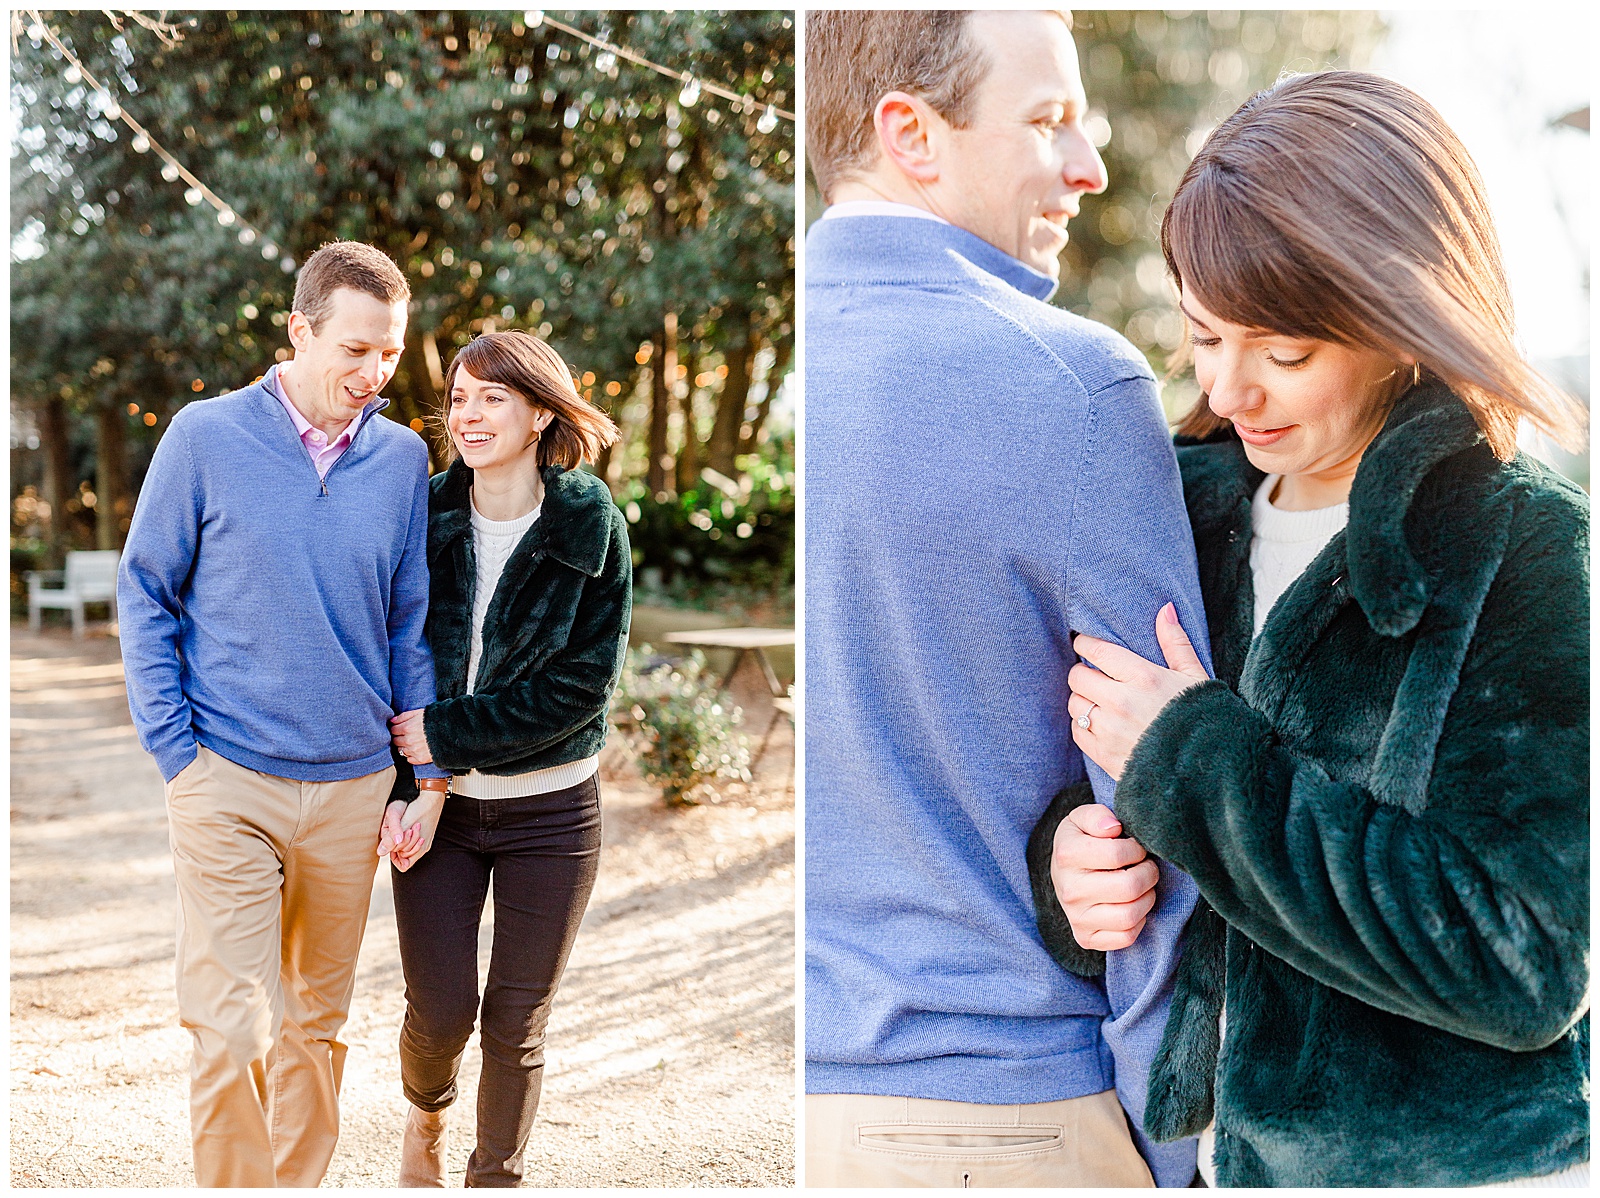 Sweet Couple in Park at Outdoor Winter Golden Hour Engagement Session in NC - green fuzzy coat, short brown hair bride outfit ideas